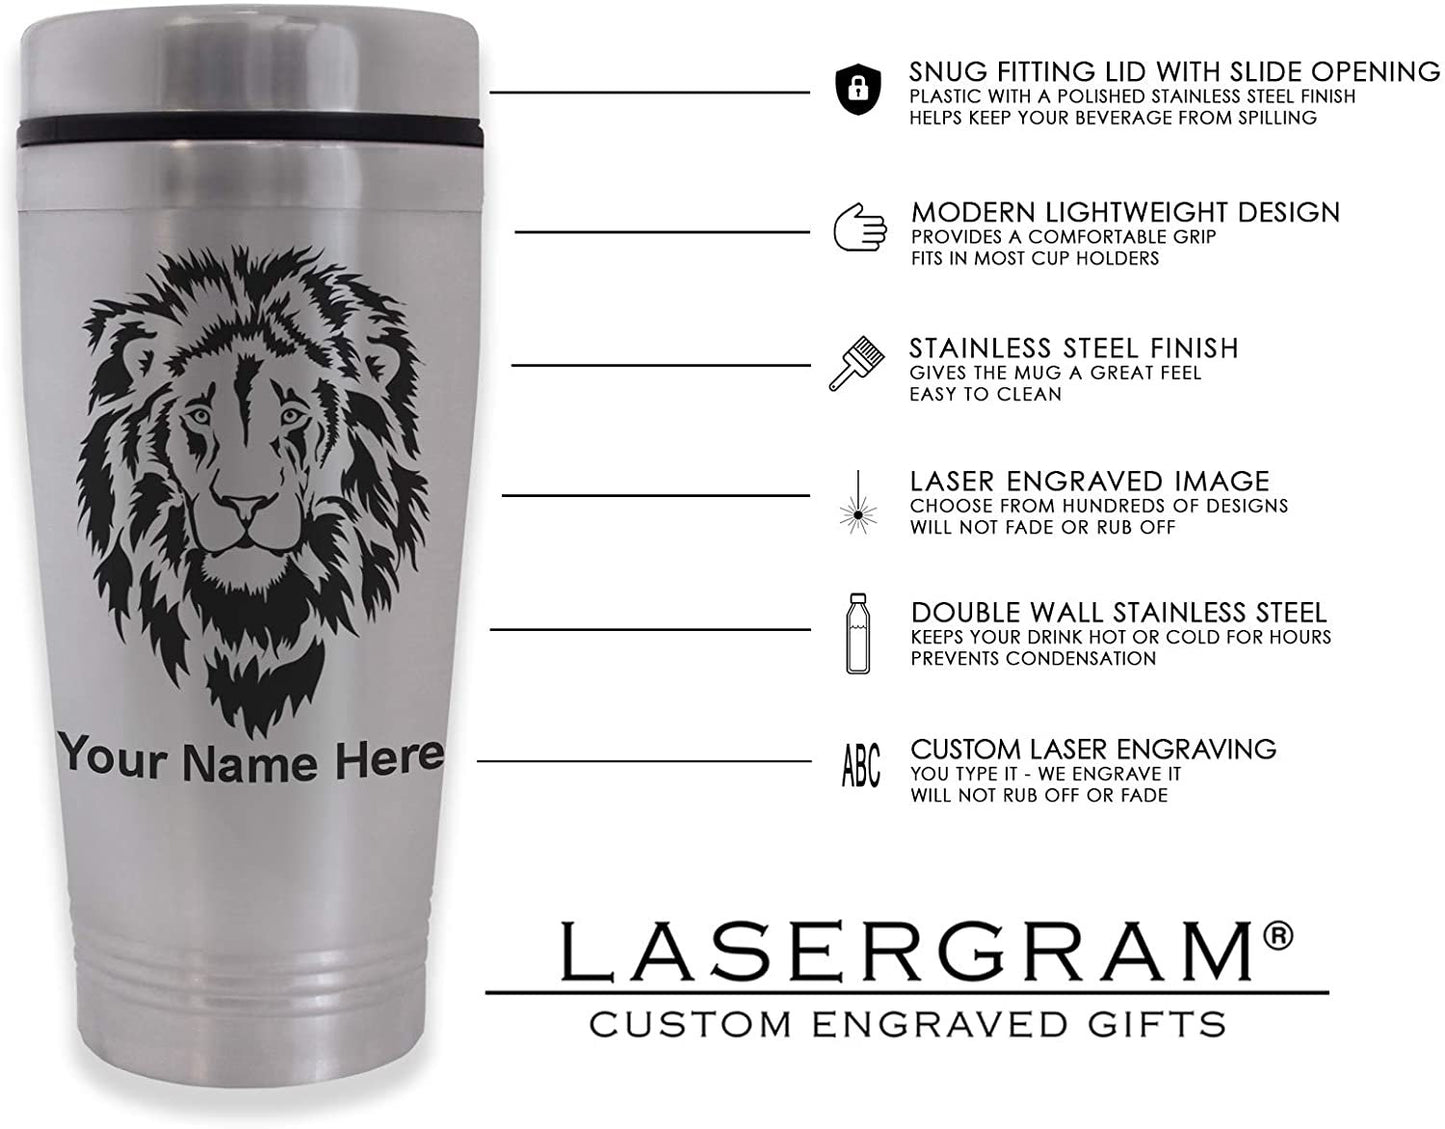 Commuter Travel Mug, Chiropractic Symbol, Personalized Engraving Included